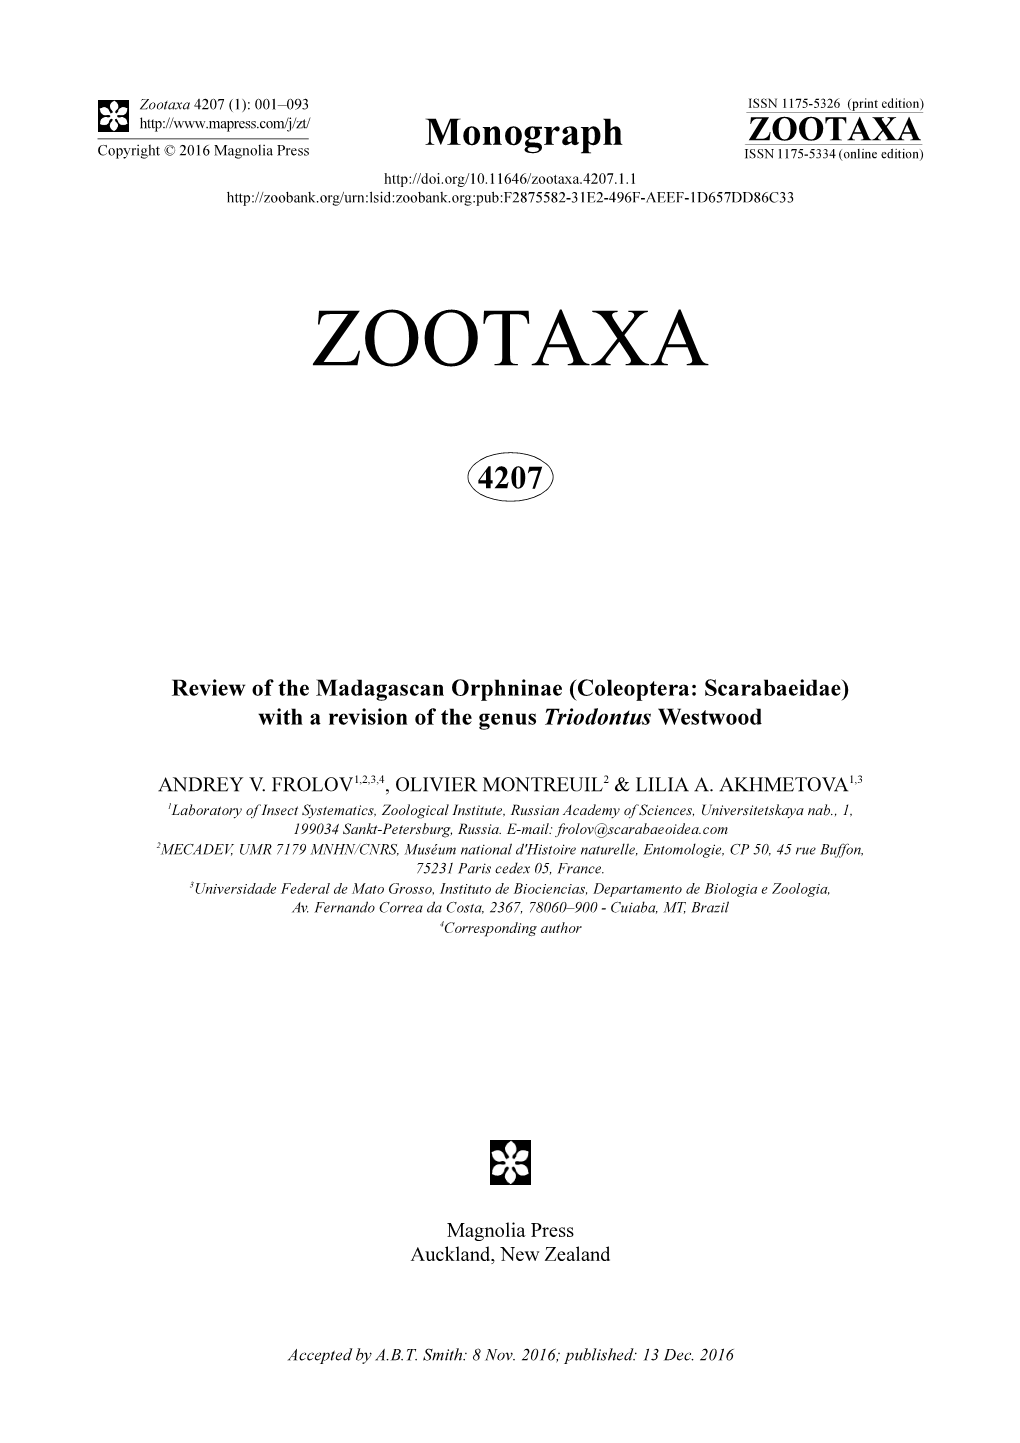 Review of the Madagascan Orphninae (Coleoptera: Scarabaeidae) with a Revision of the Genus Triodontus Westwood